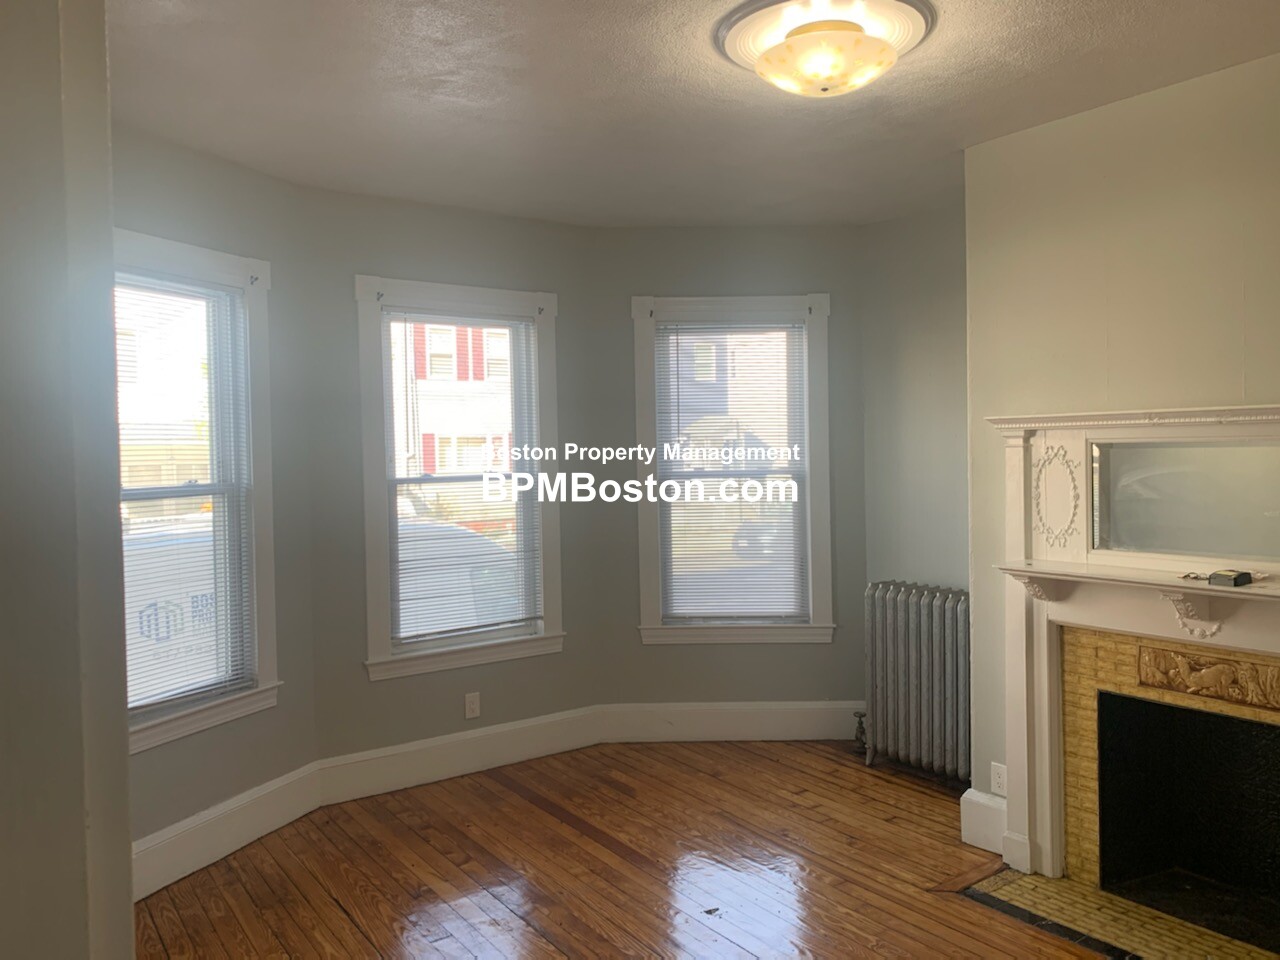 Photos of apartment on Carter St.,Chelsea MA 02150